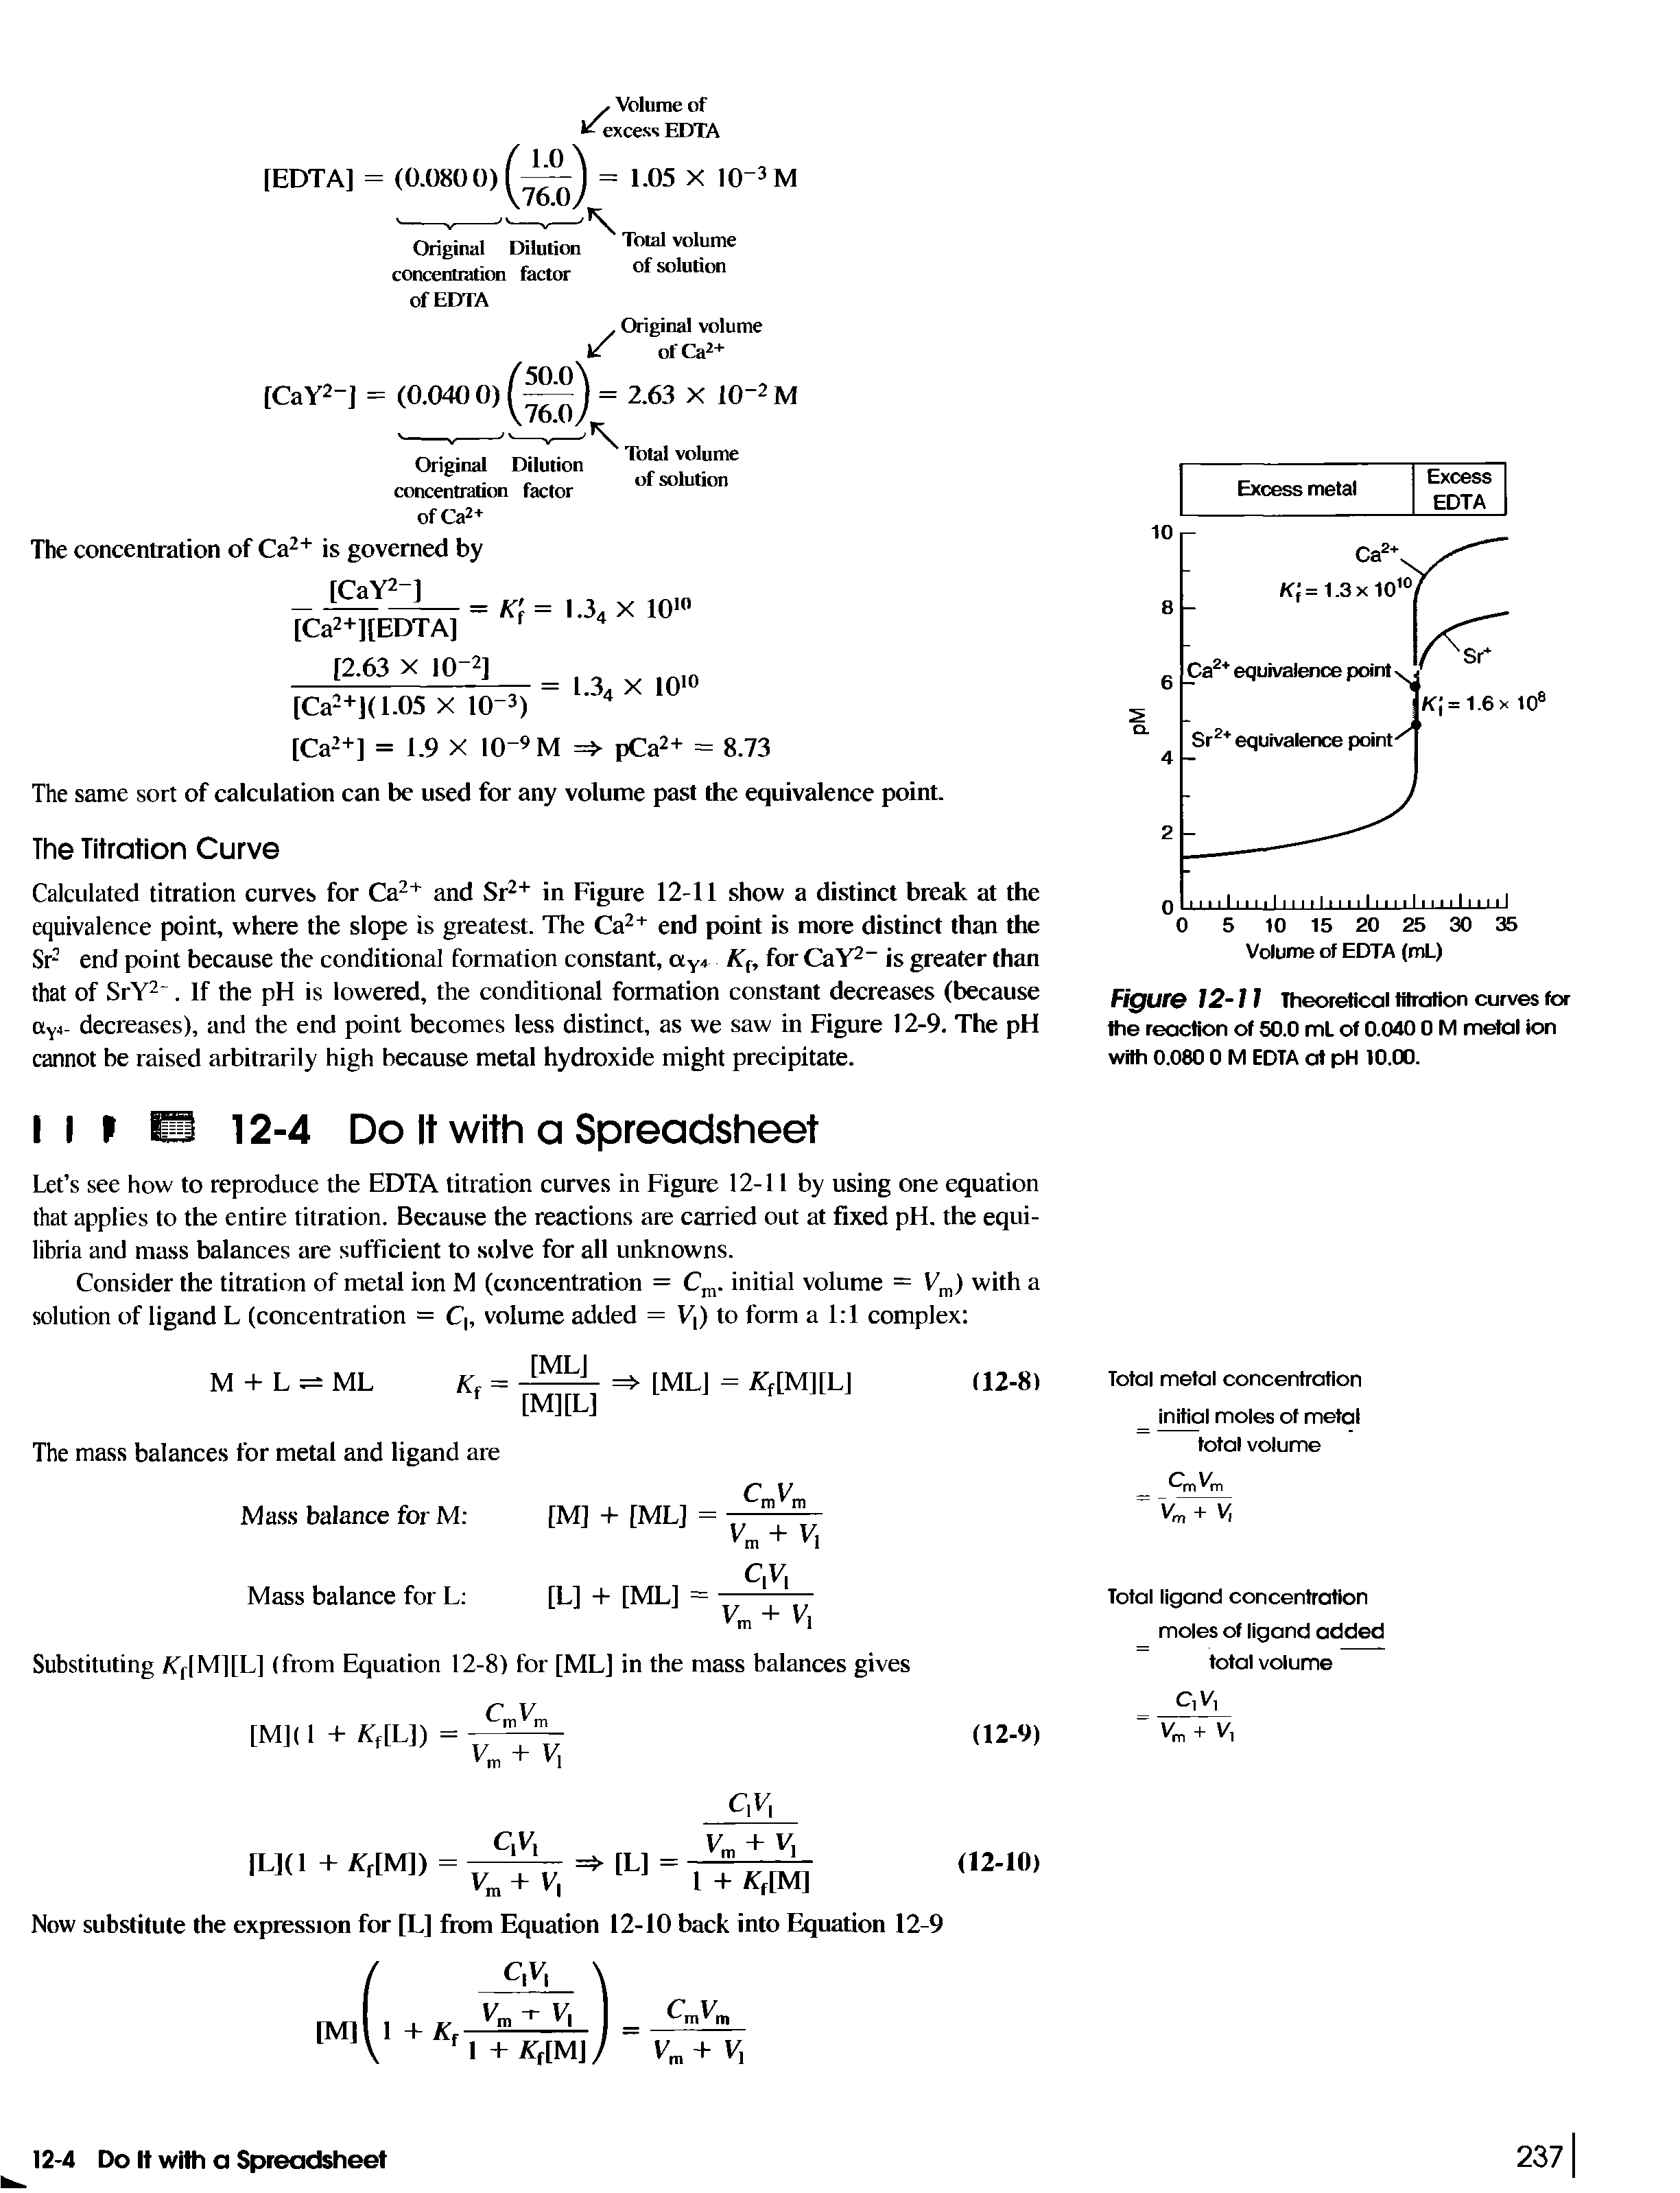 Figure 12-11 Theoretical titration curves for the reaction of 50.0 mL of 0.040 0 M metal ion with 0.080 0 M EDTA at pH 10.00.